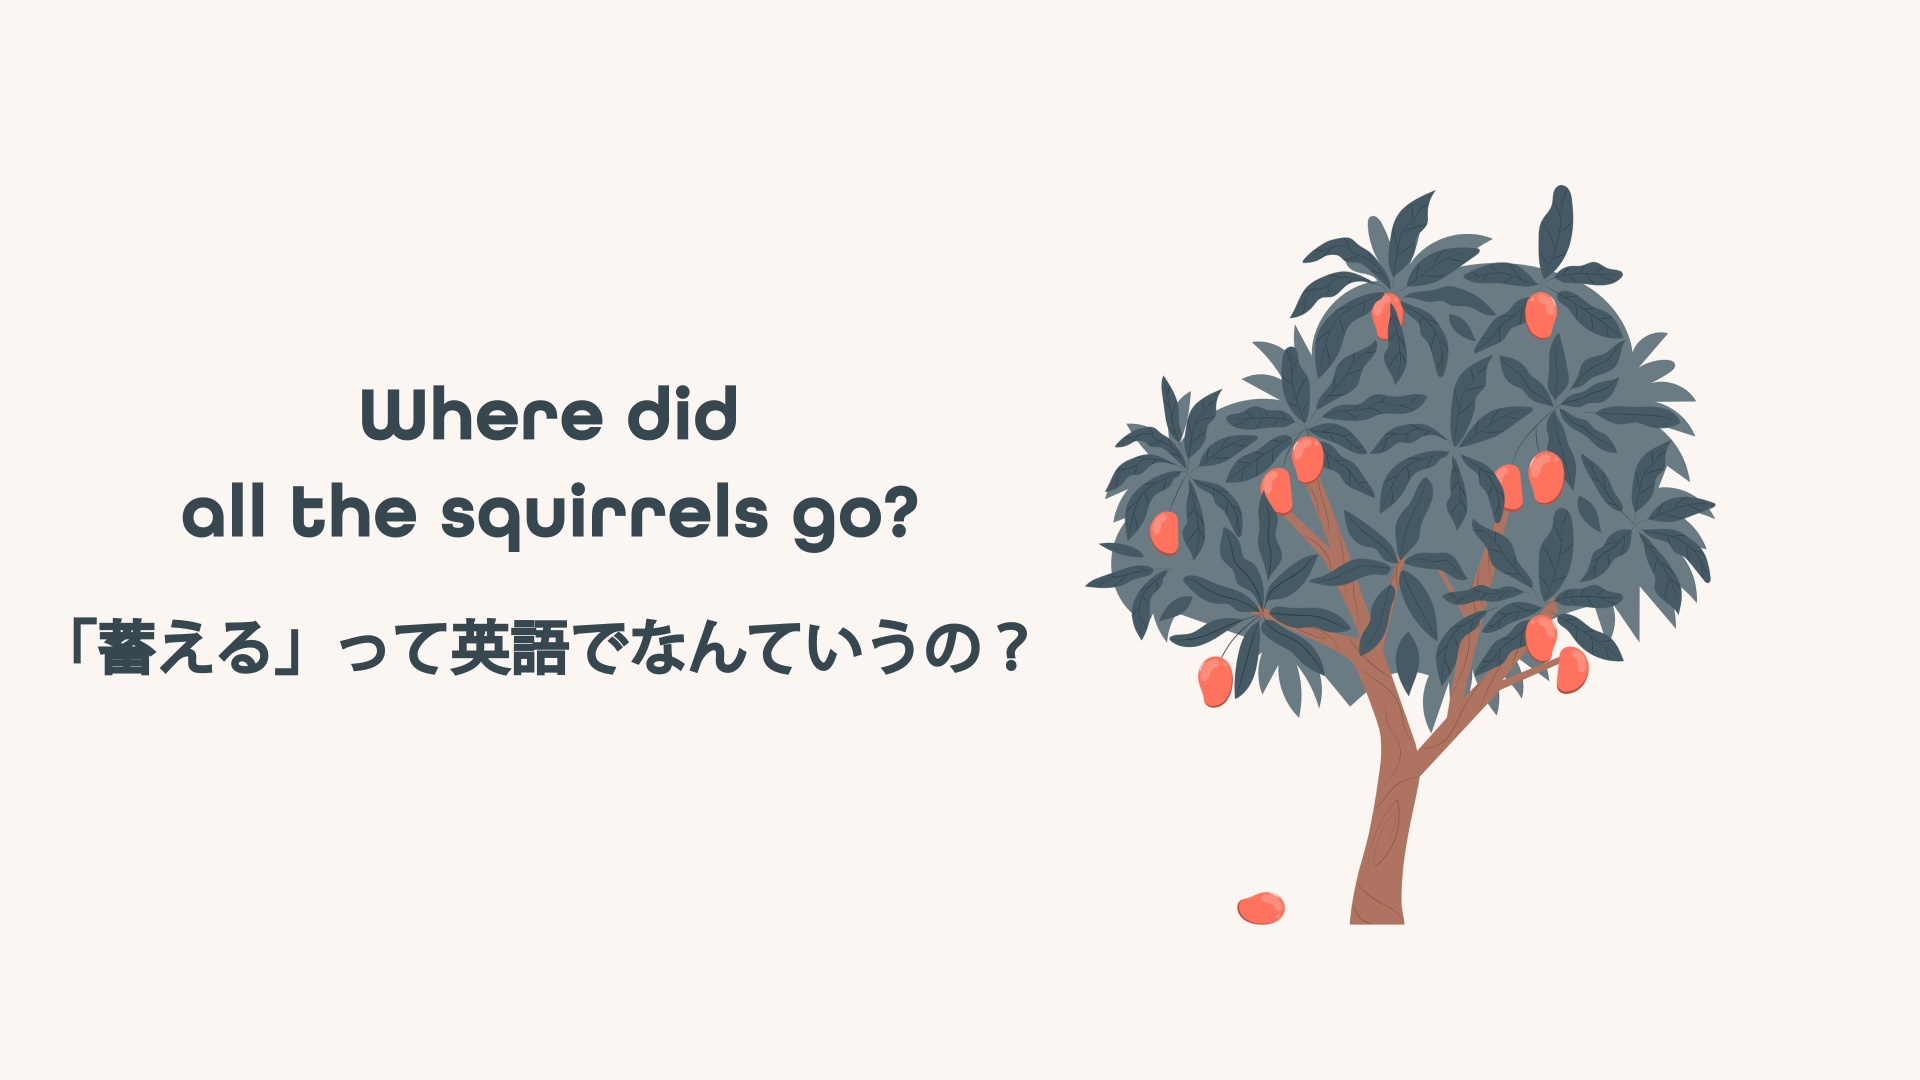 Featured image for “Where did all the squirrels go? 「蓄える」って英語でなんていうの？”